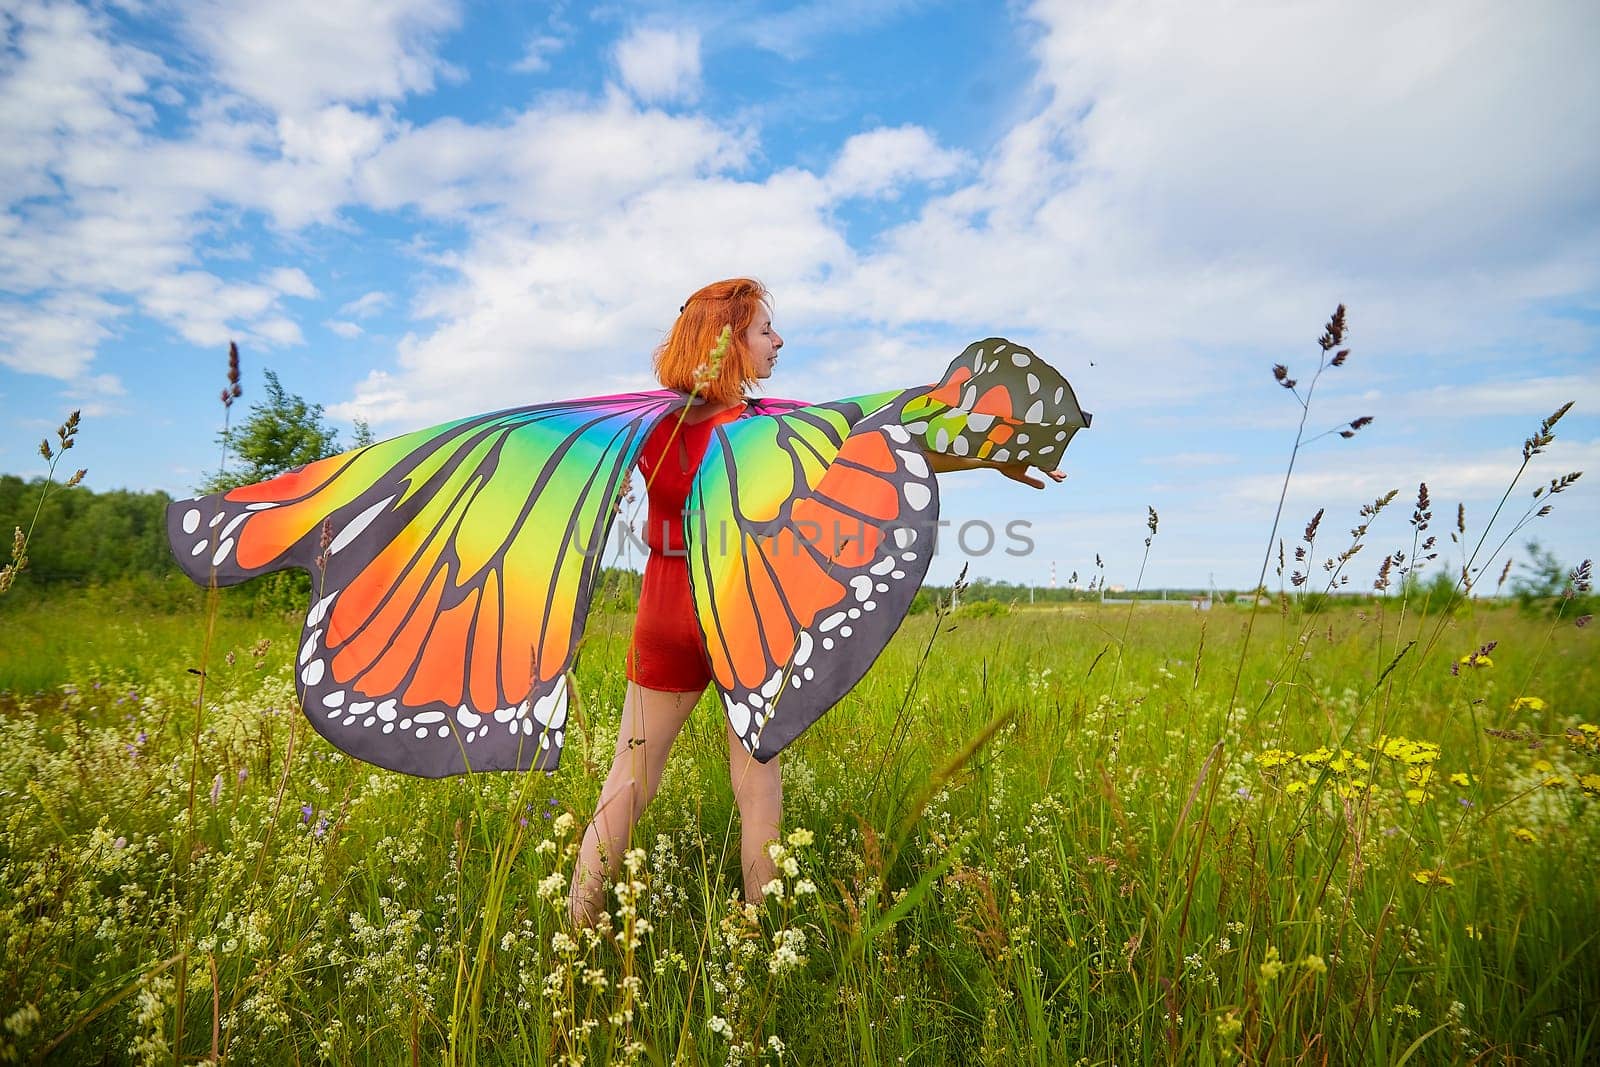 Adult girl with red hair and butterfly wings having fun and joy in meadow or field with grass, flowers on sunny summer day